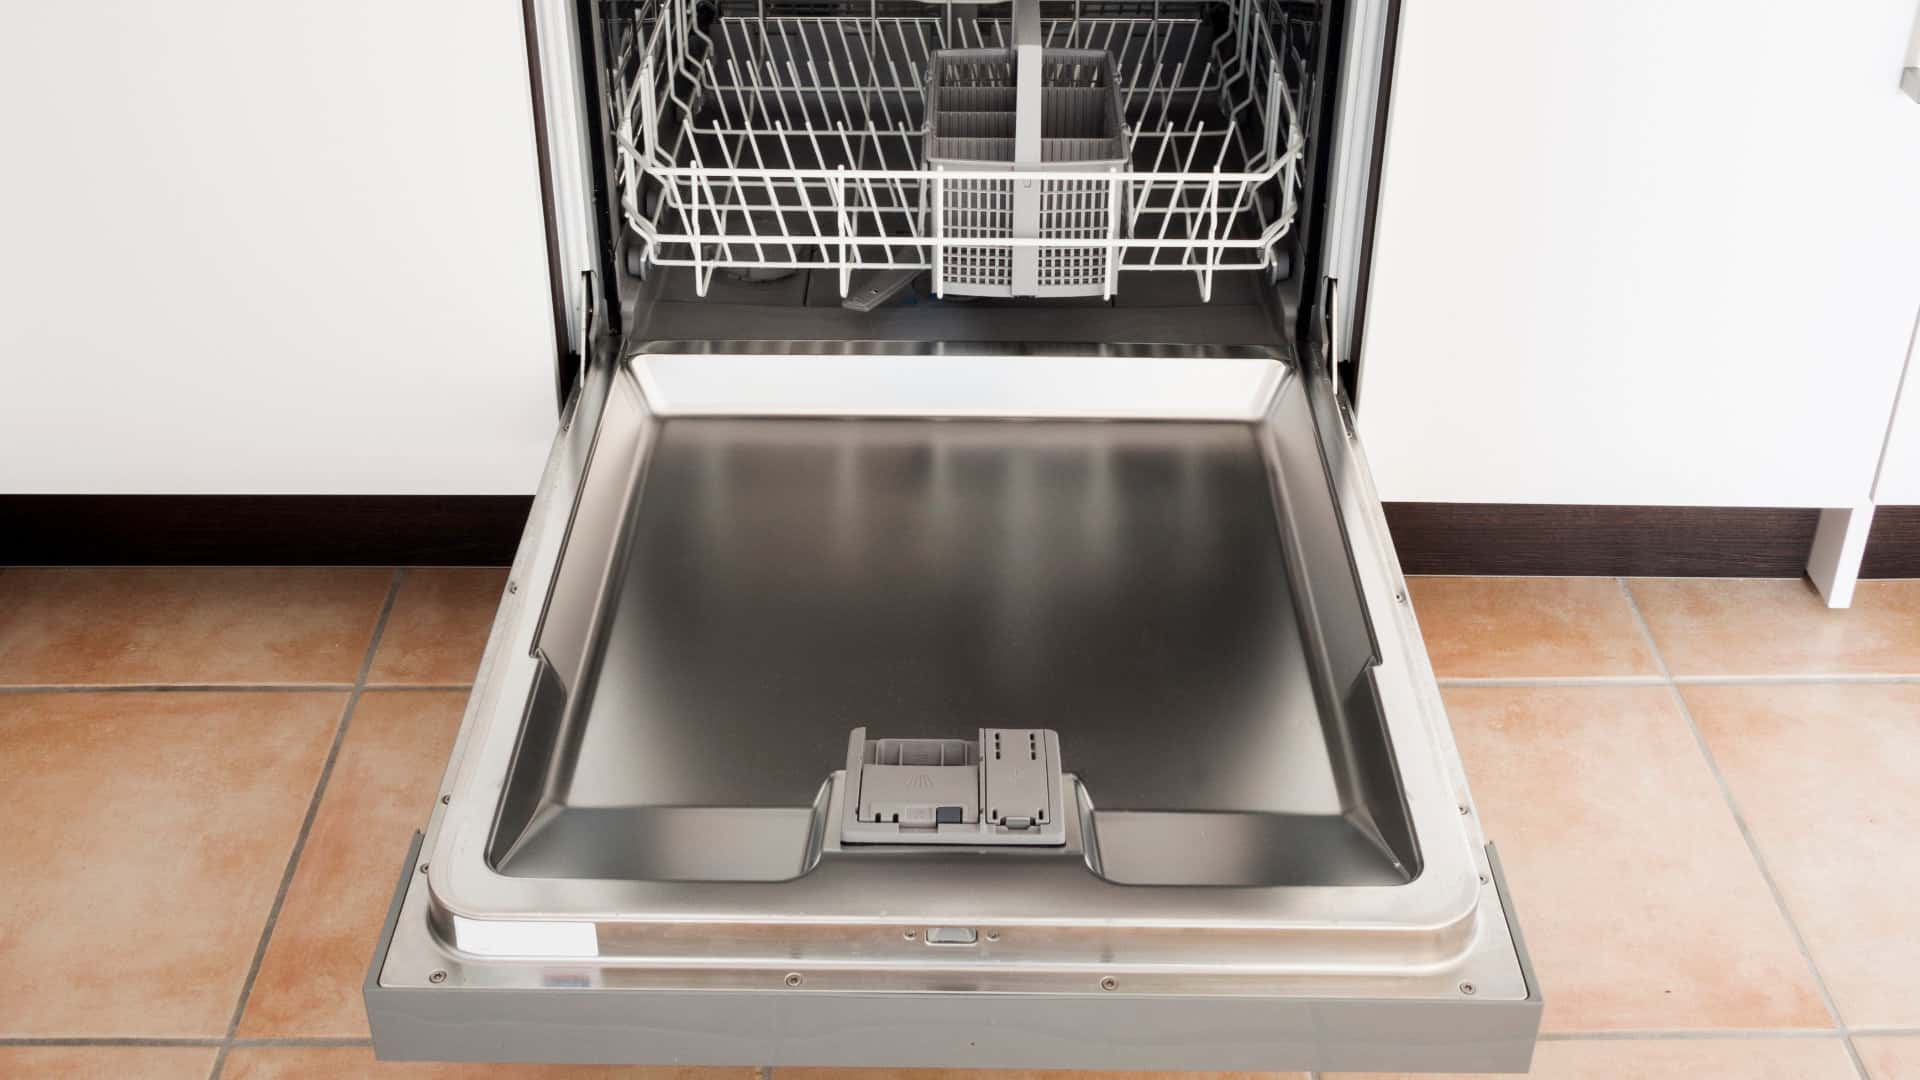 Featured image for “How to Resolve the Bosch Dishwasher E15 Error Code”